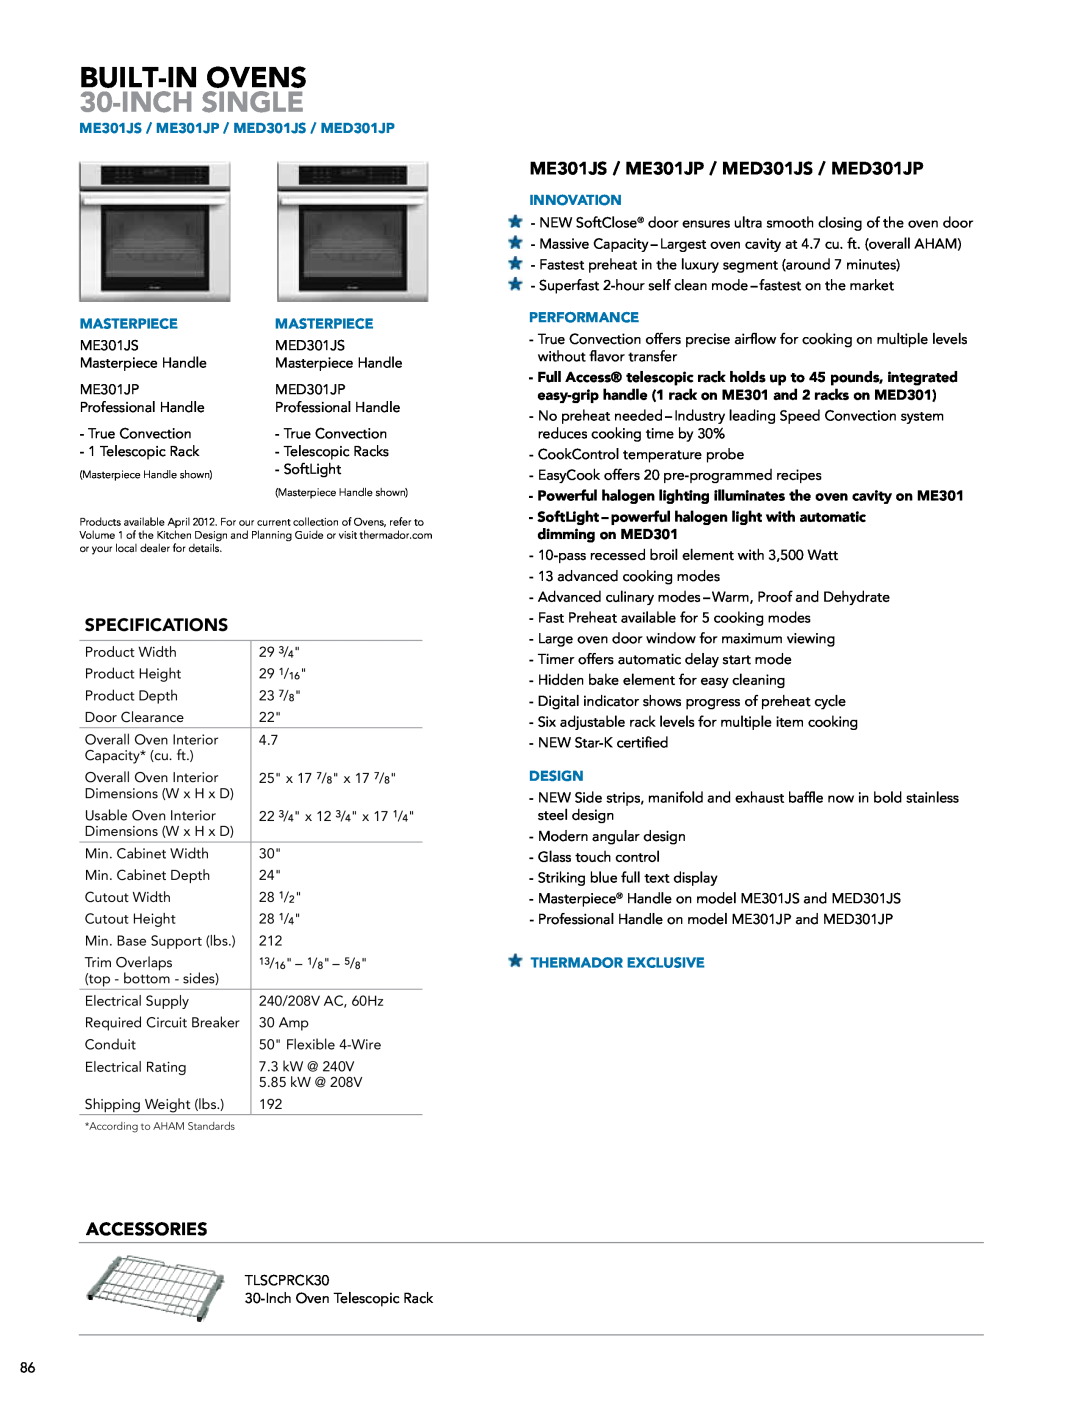 Thermador DWHD651JFP manual BUILT-IN OVENS 30-INCH SINGLE, Powerful halogen lighting illuminates the oven cavity on ME301 